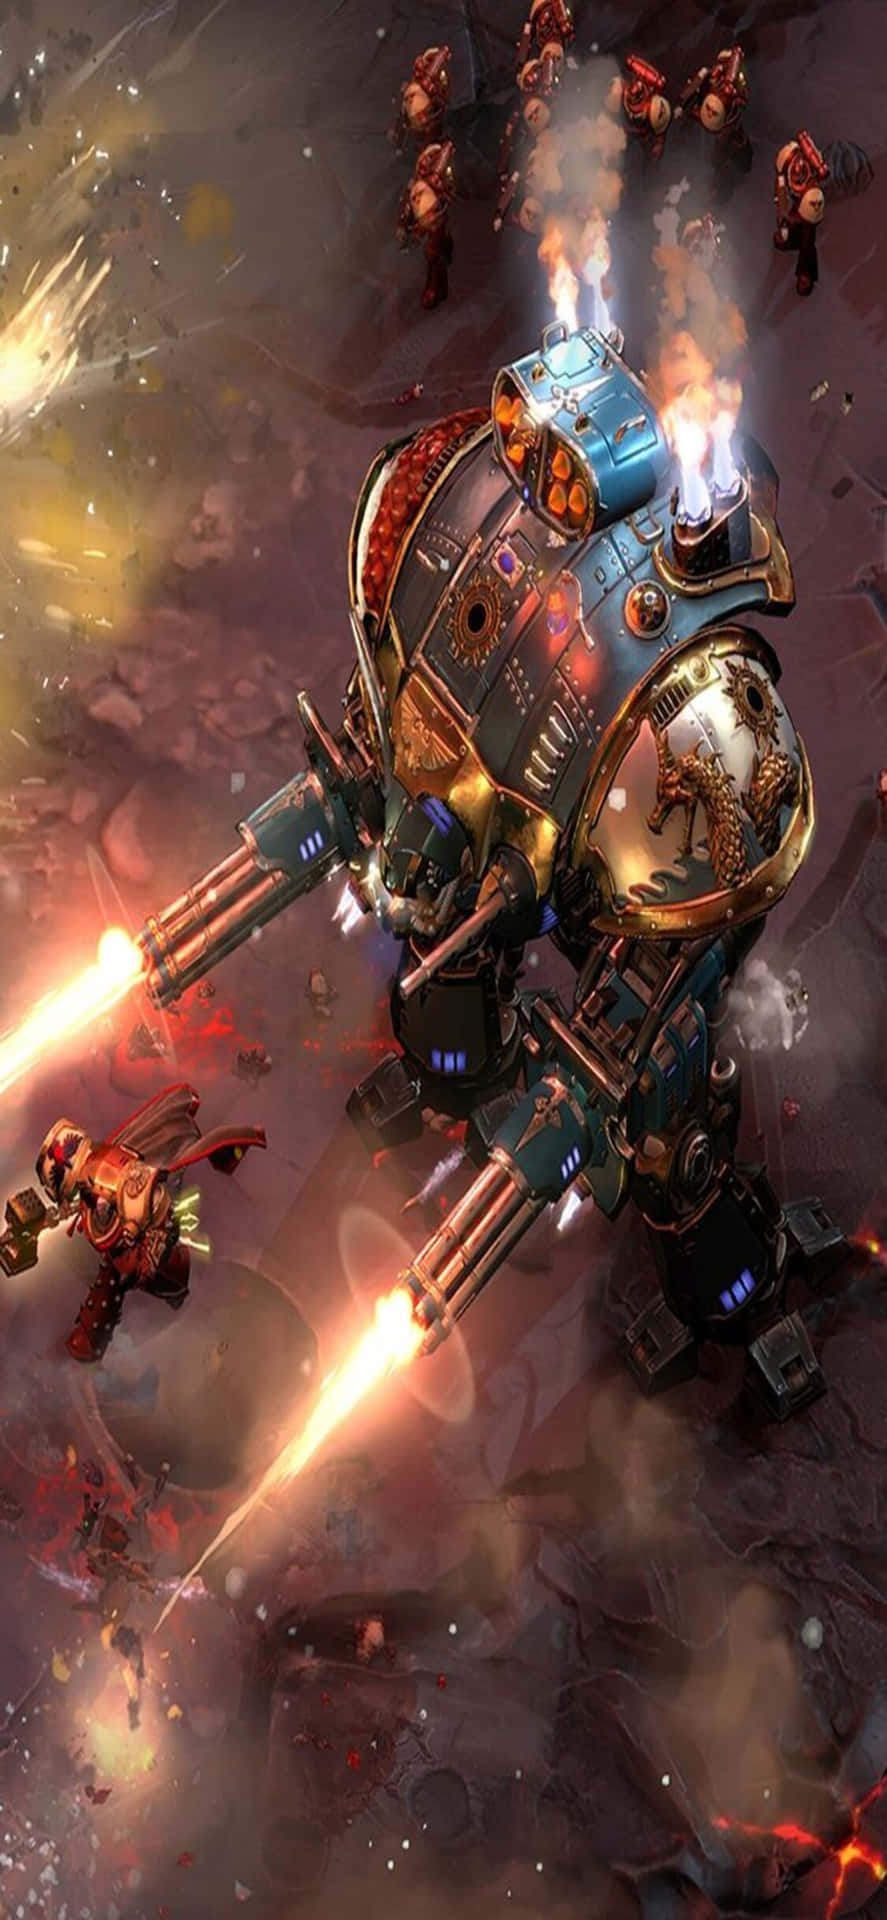 "The Epic Battle Is Here - Dawn Of War III"